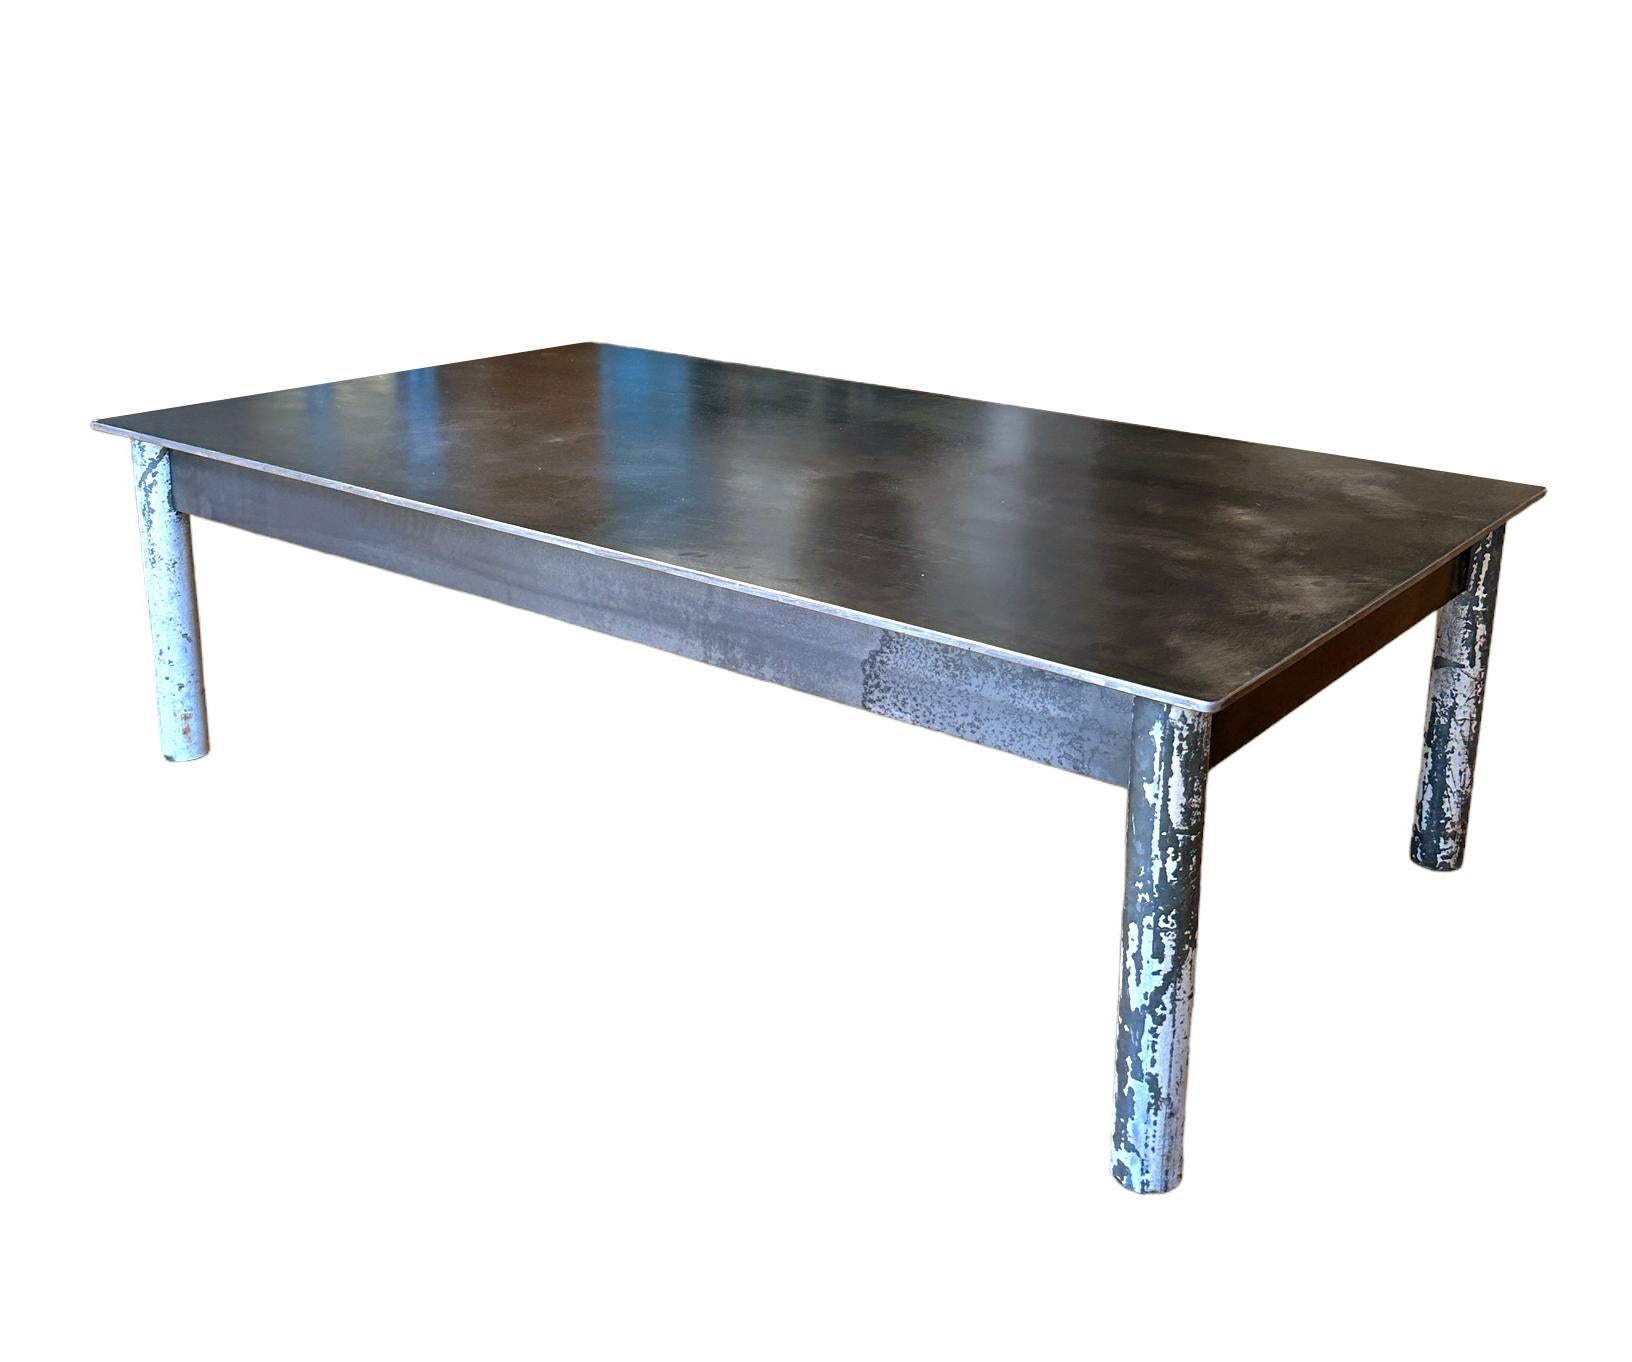 This coffee table is made with hot rolled steel and repurposed steel tube legs.  The legs were previously painted however the artist sandblasts them and maintains a majority of the paint to add to the industrial aesthetic of the piece.  This highly